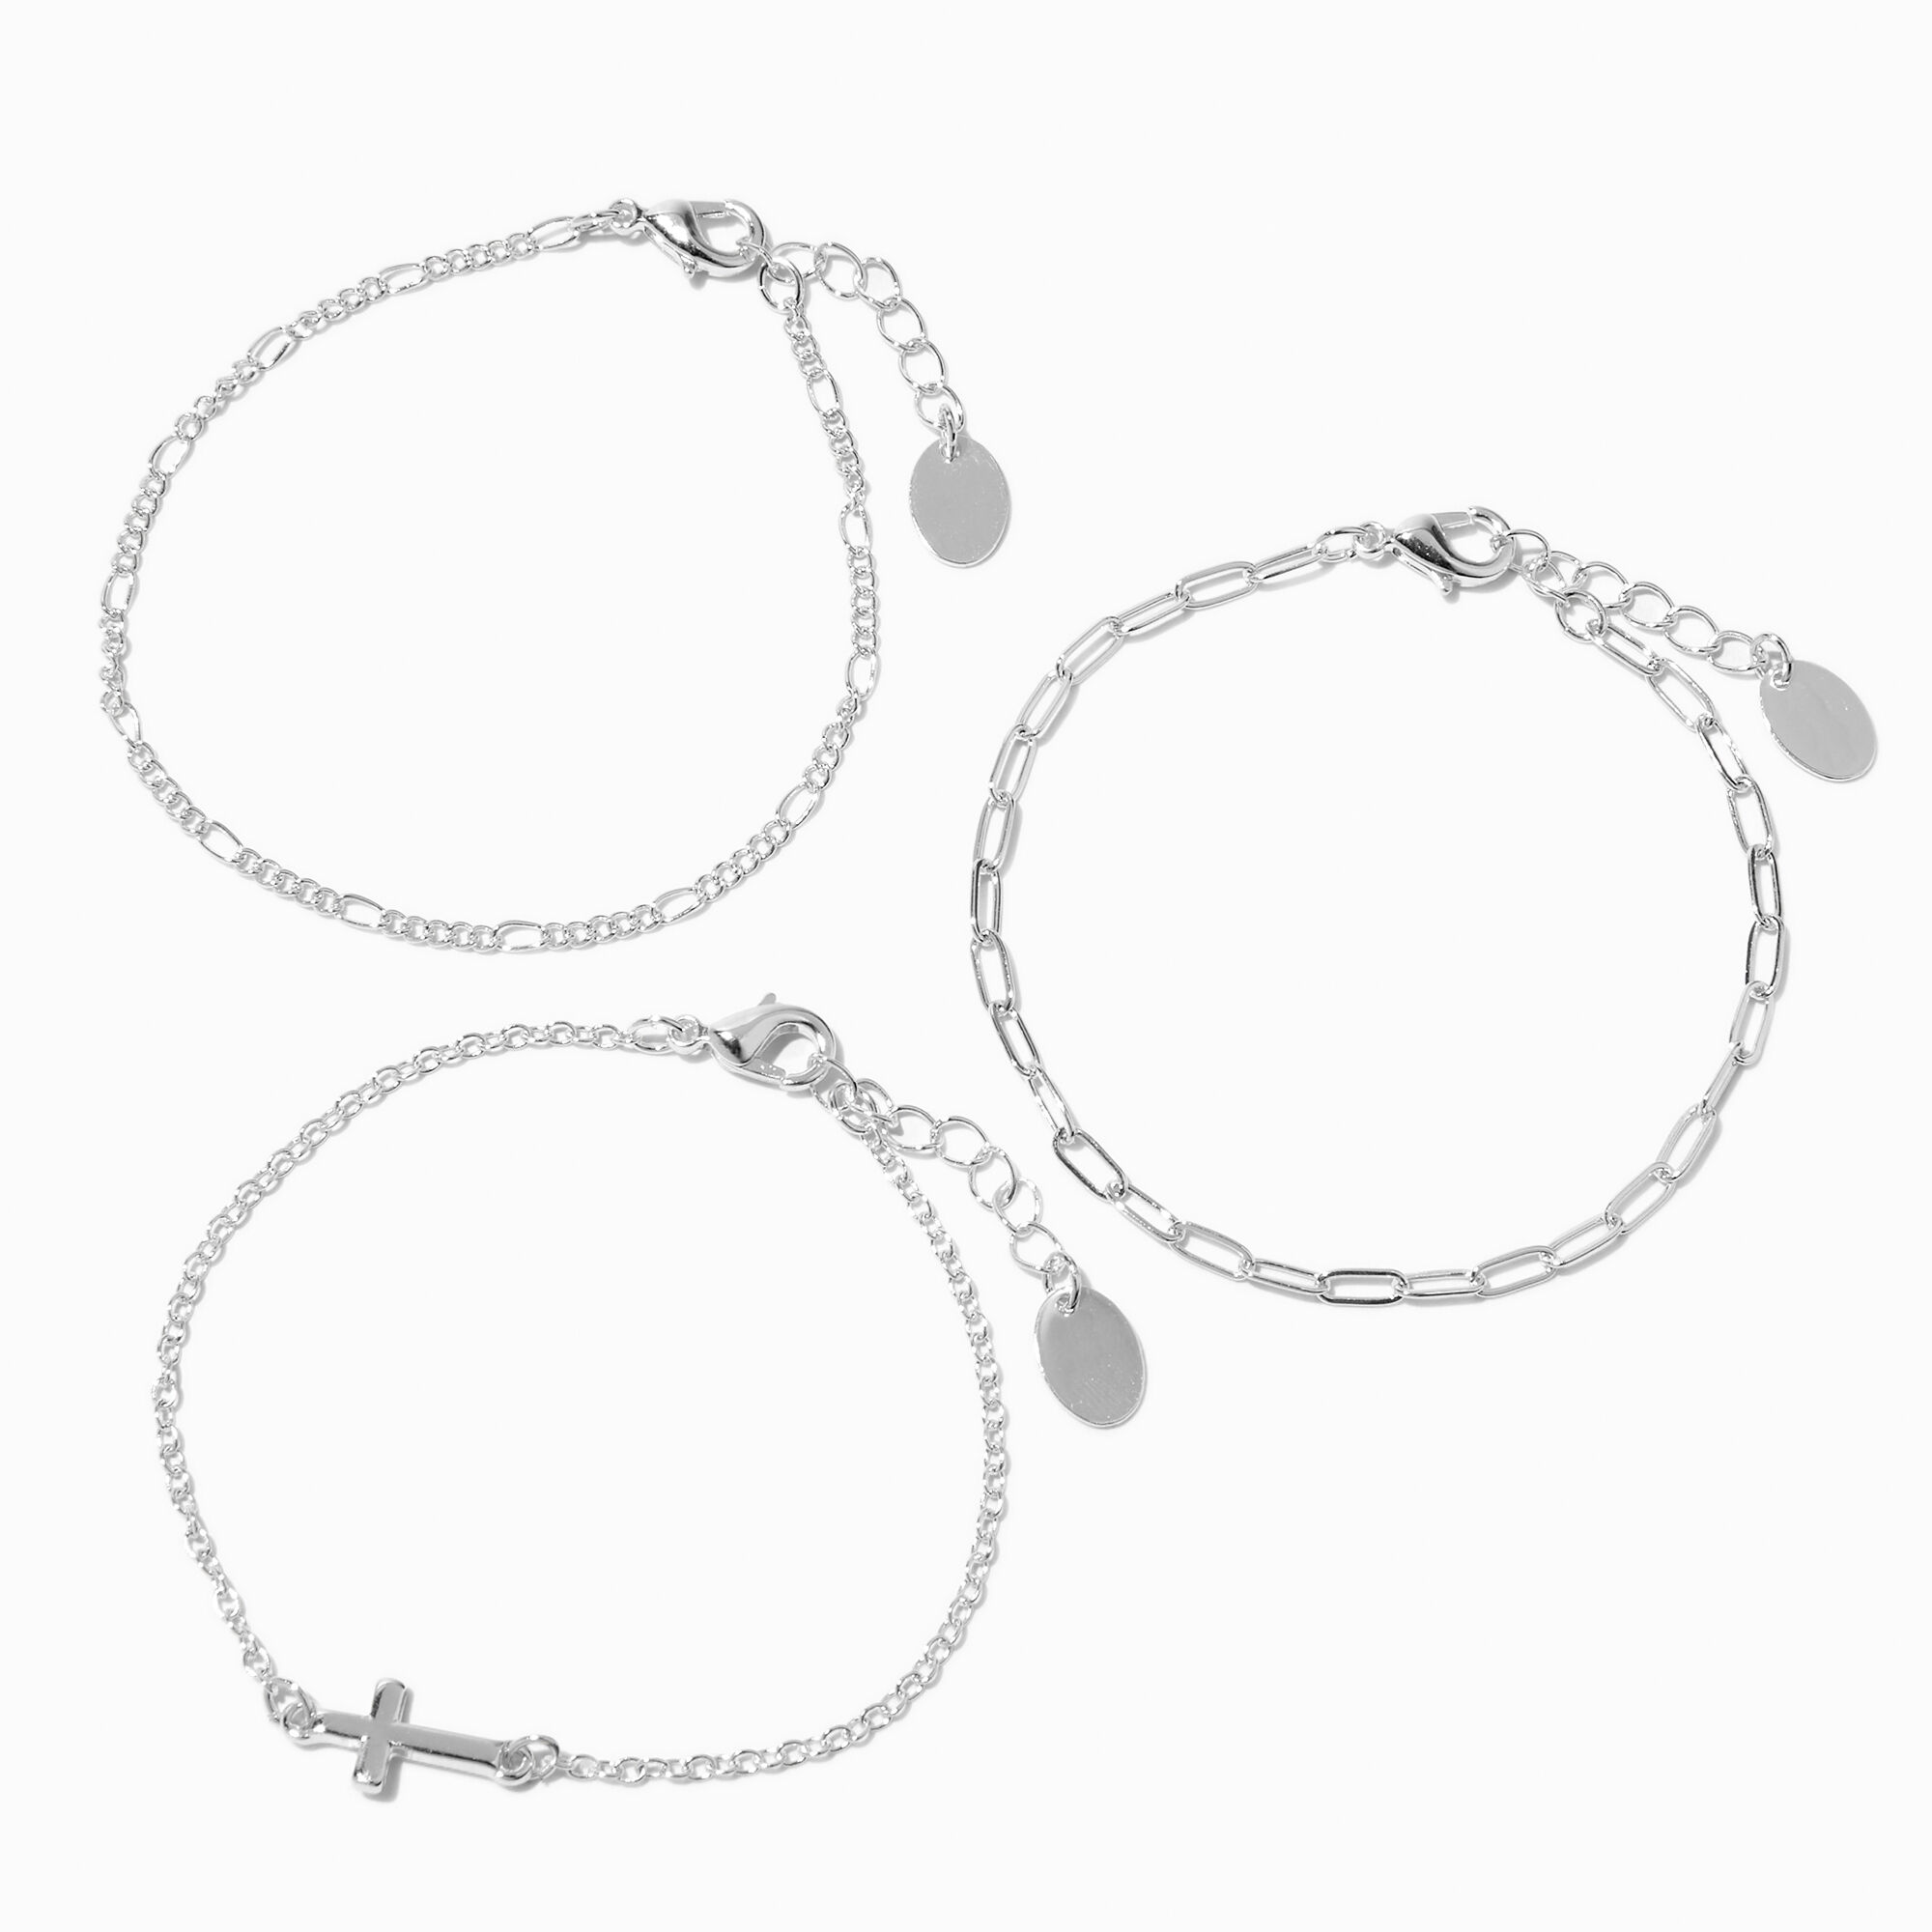 View Claires Recycled Jewelry Tone Cross Chain Bracelets 3 Pack Silver information